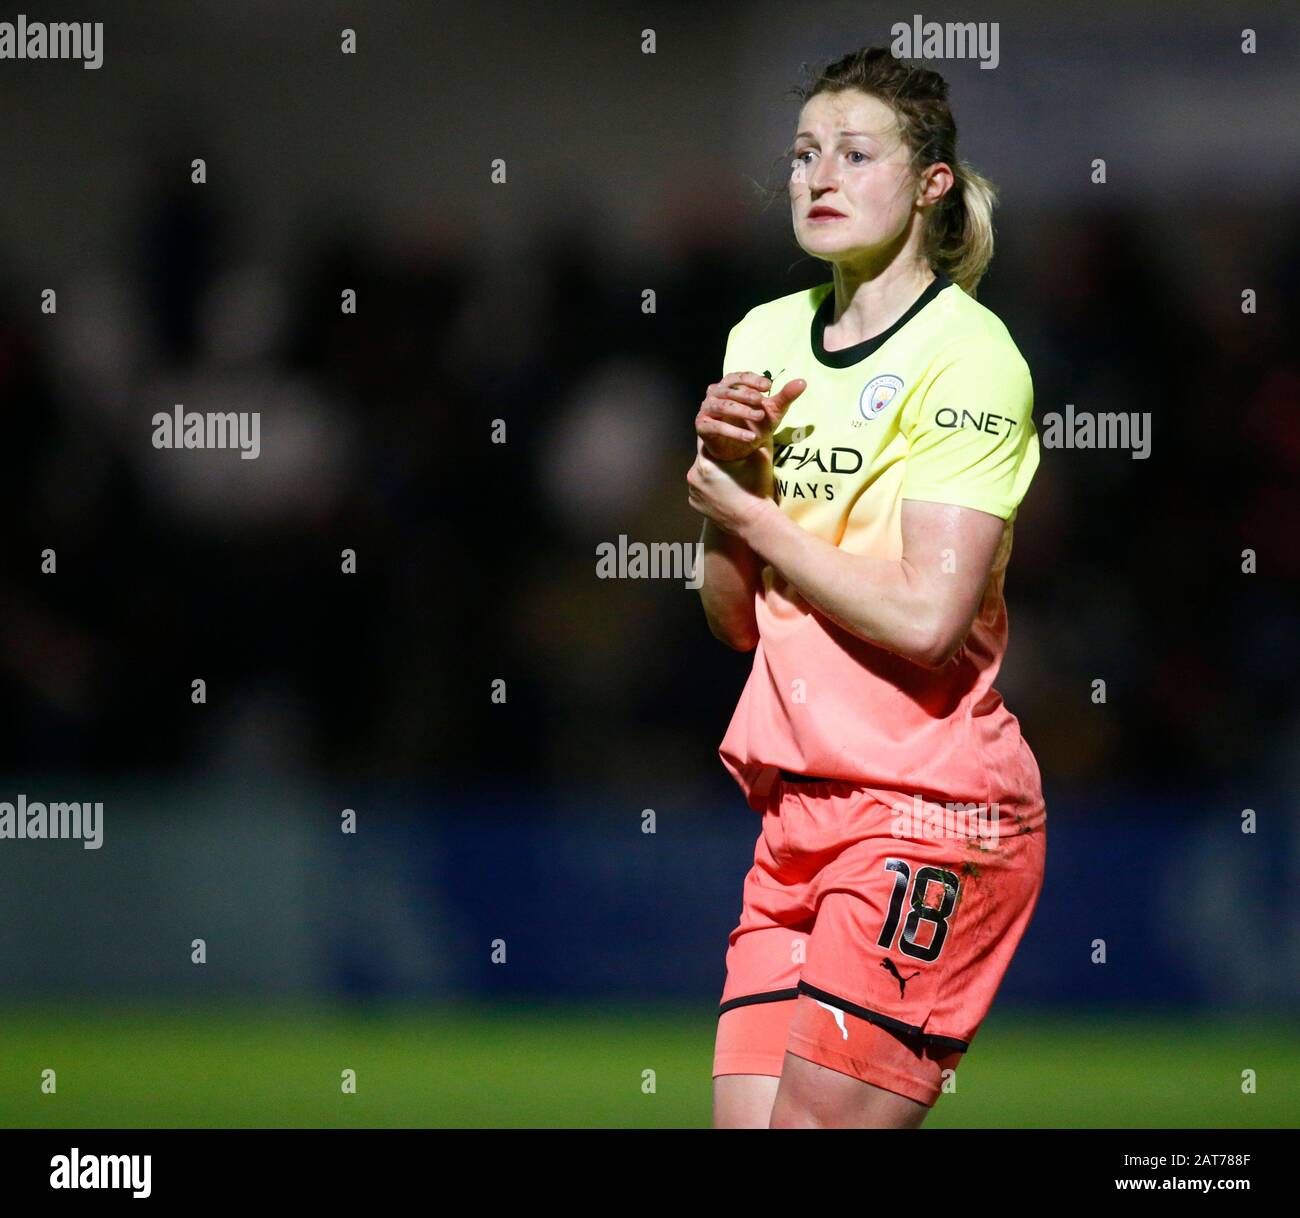 BOREHAMWOOD, ENGLAND - JANUARY 29: Ellen White of Manchester City WFC  during Continental Cup Semi-Final match between Arsenal Women and  Manchester City Women at Meadow Park Stadium on January 29, 2020 in